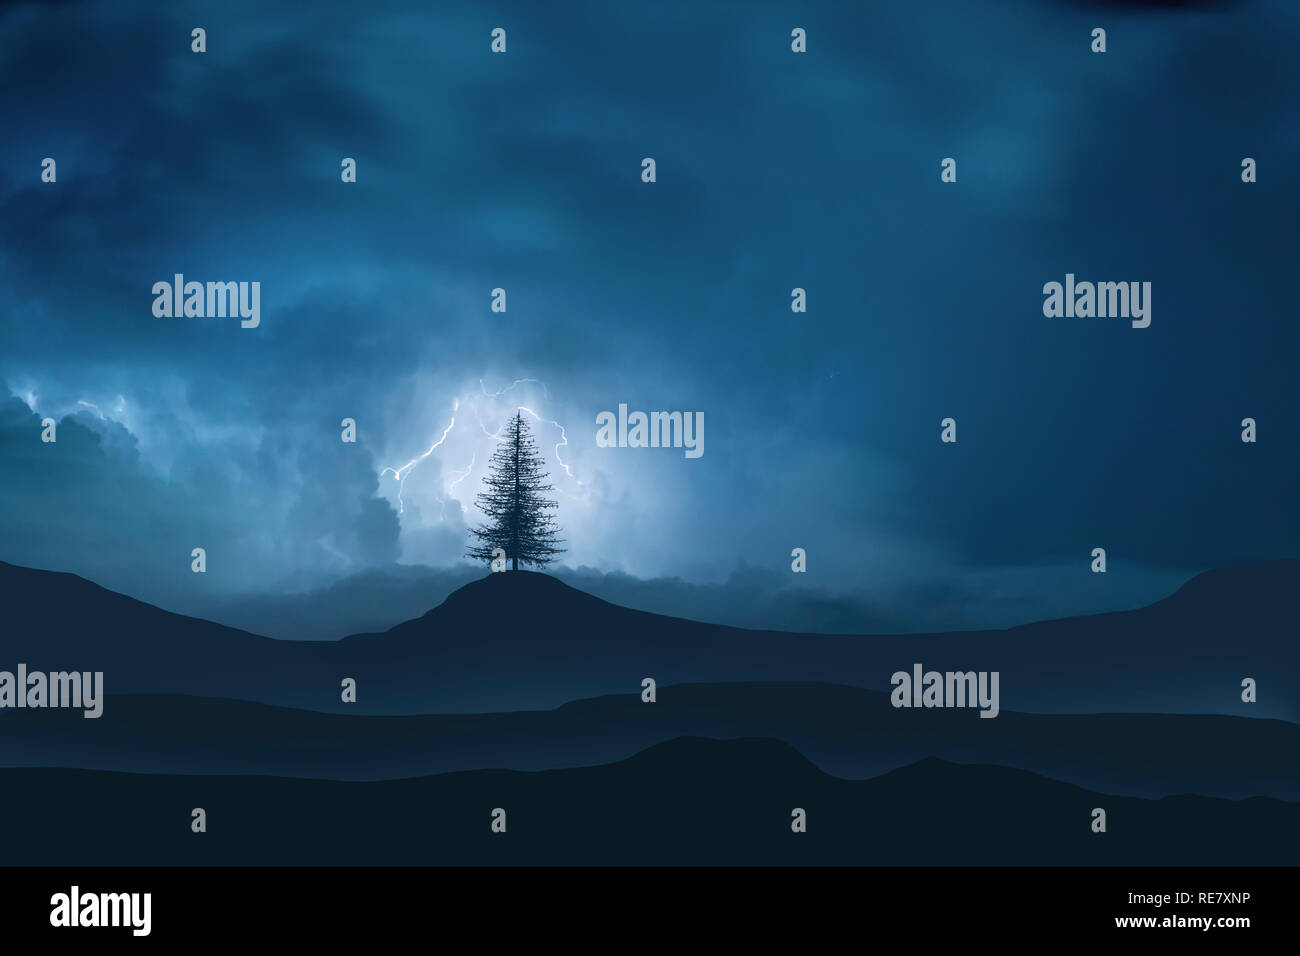 Lonely tree on a background of mountains with lightning. Stock Photo